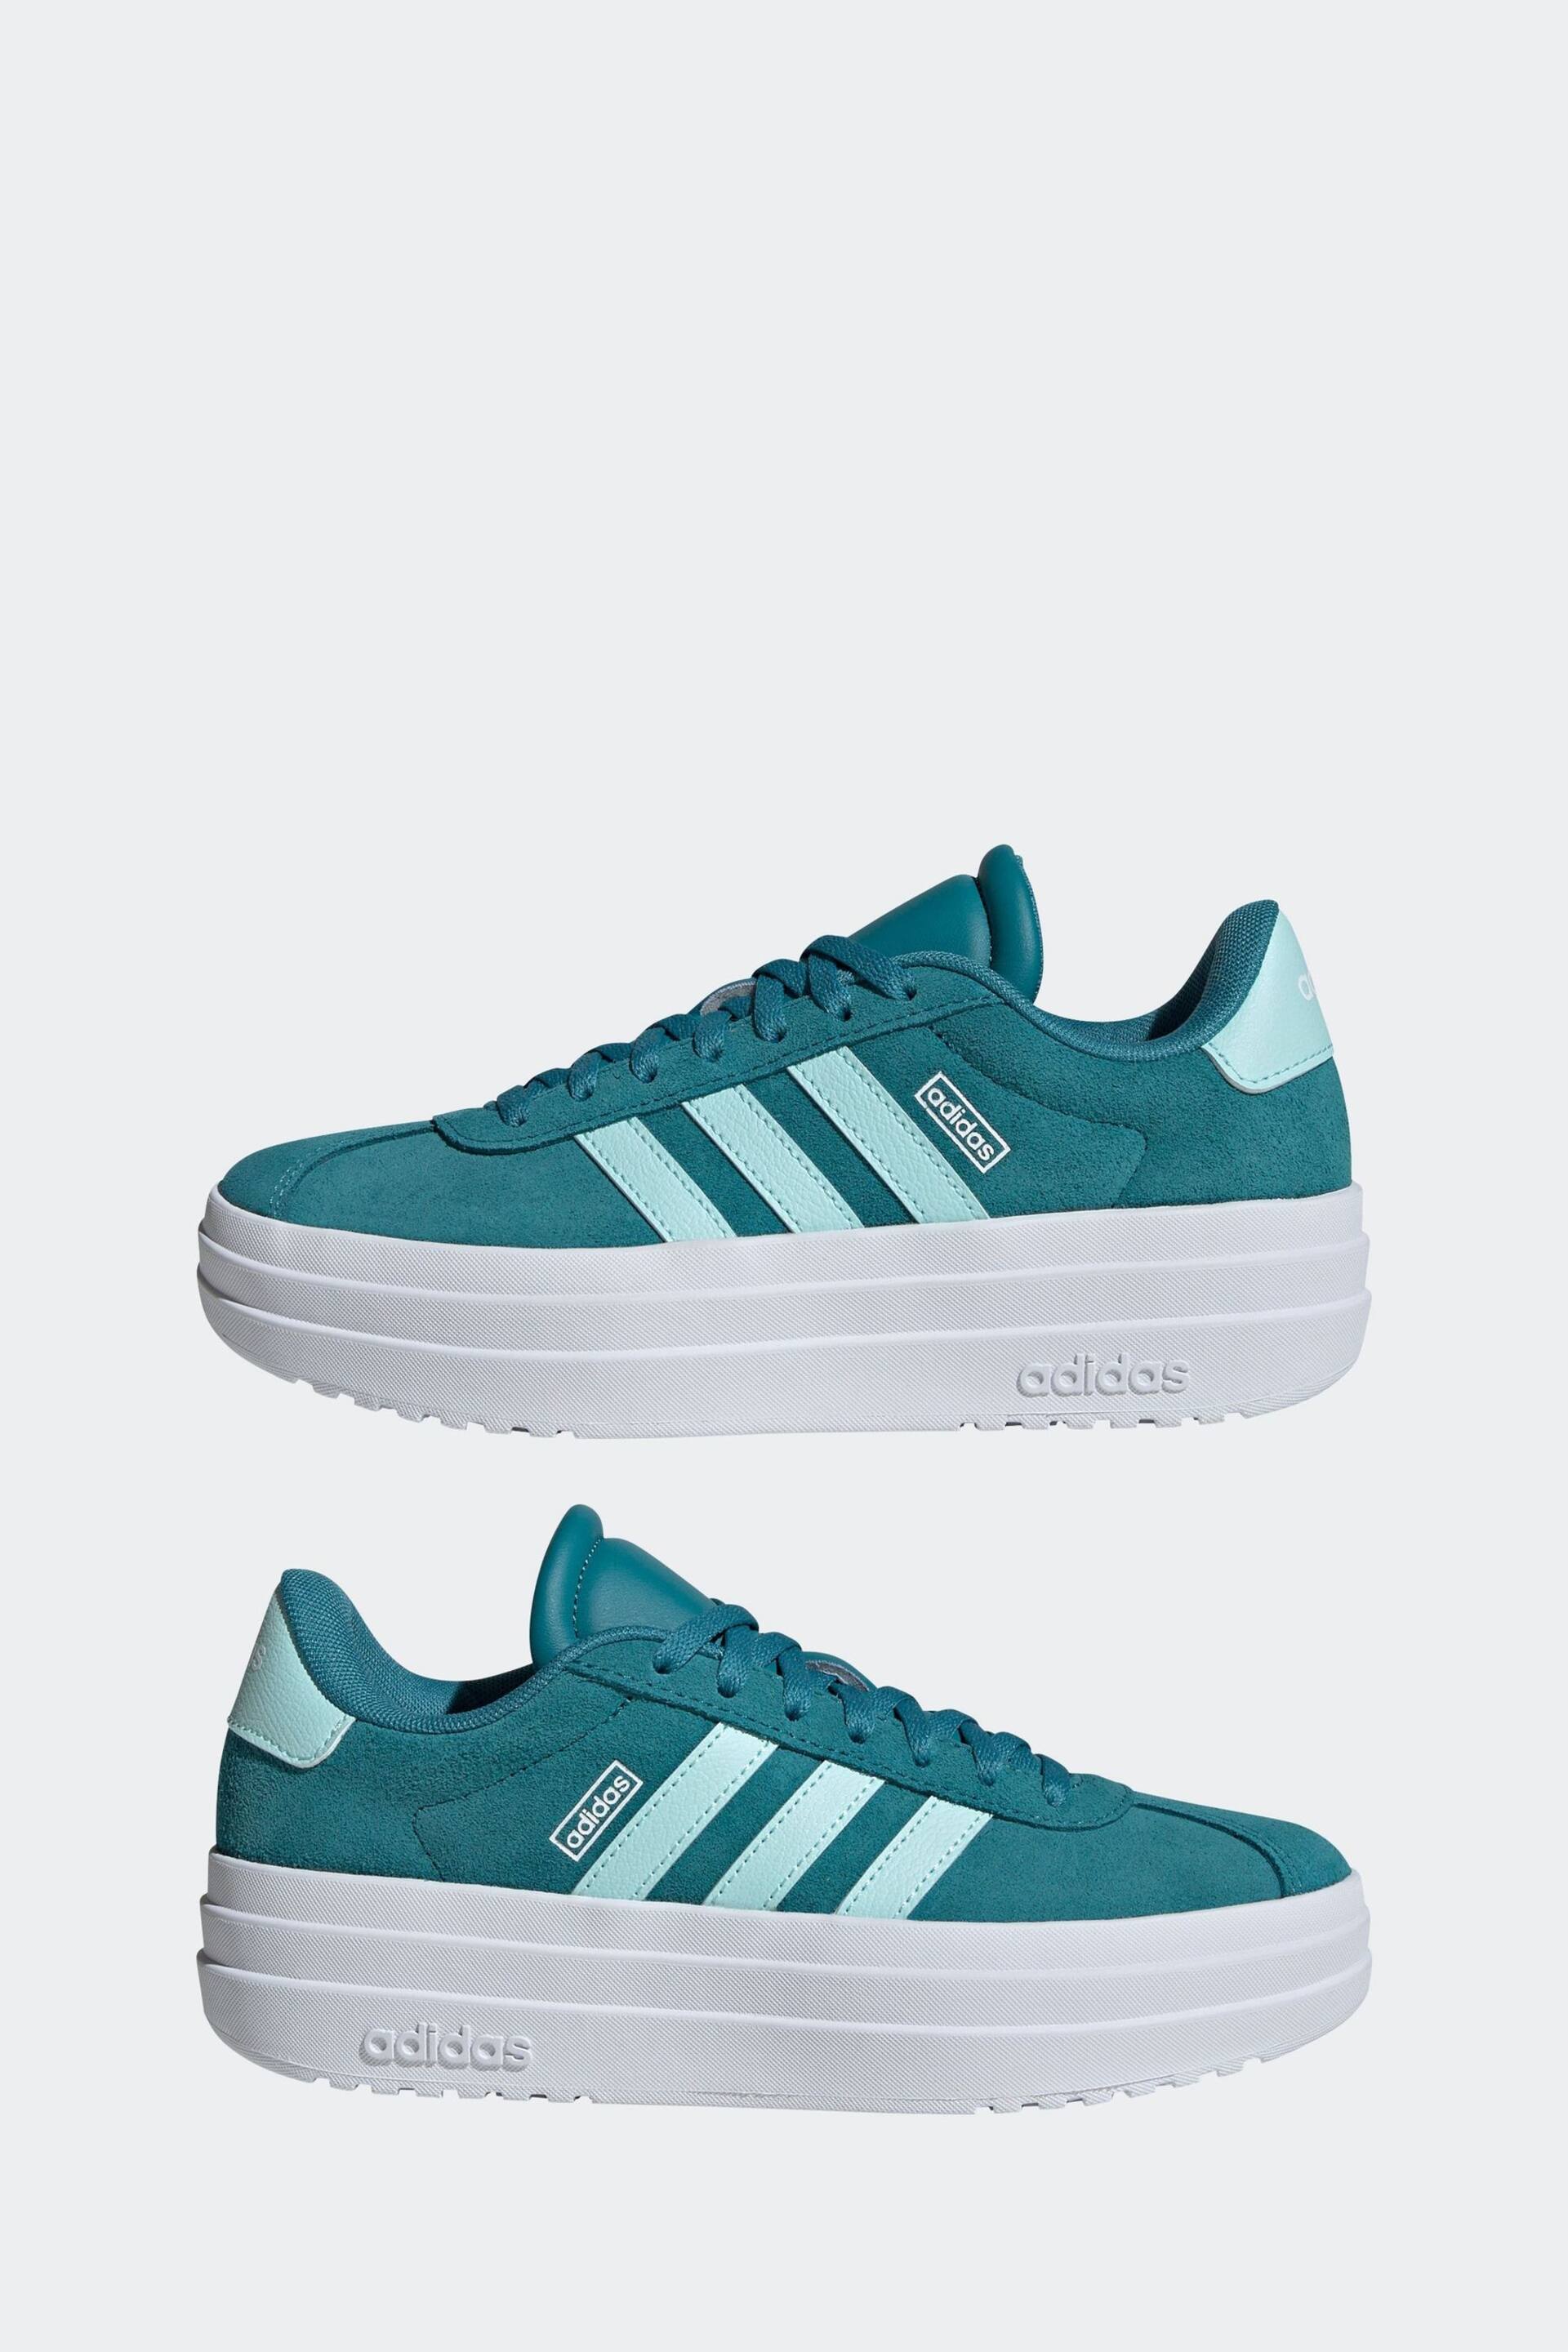 adidas Blue/White Kids VL Court Bold Trainers - Image 7 of 13